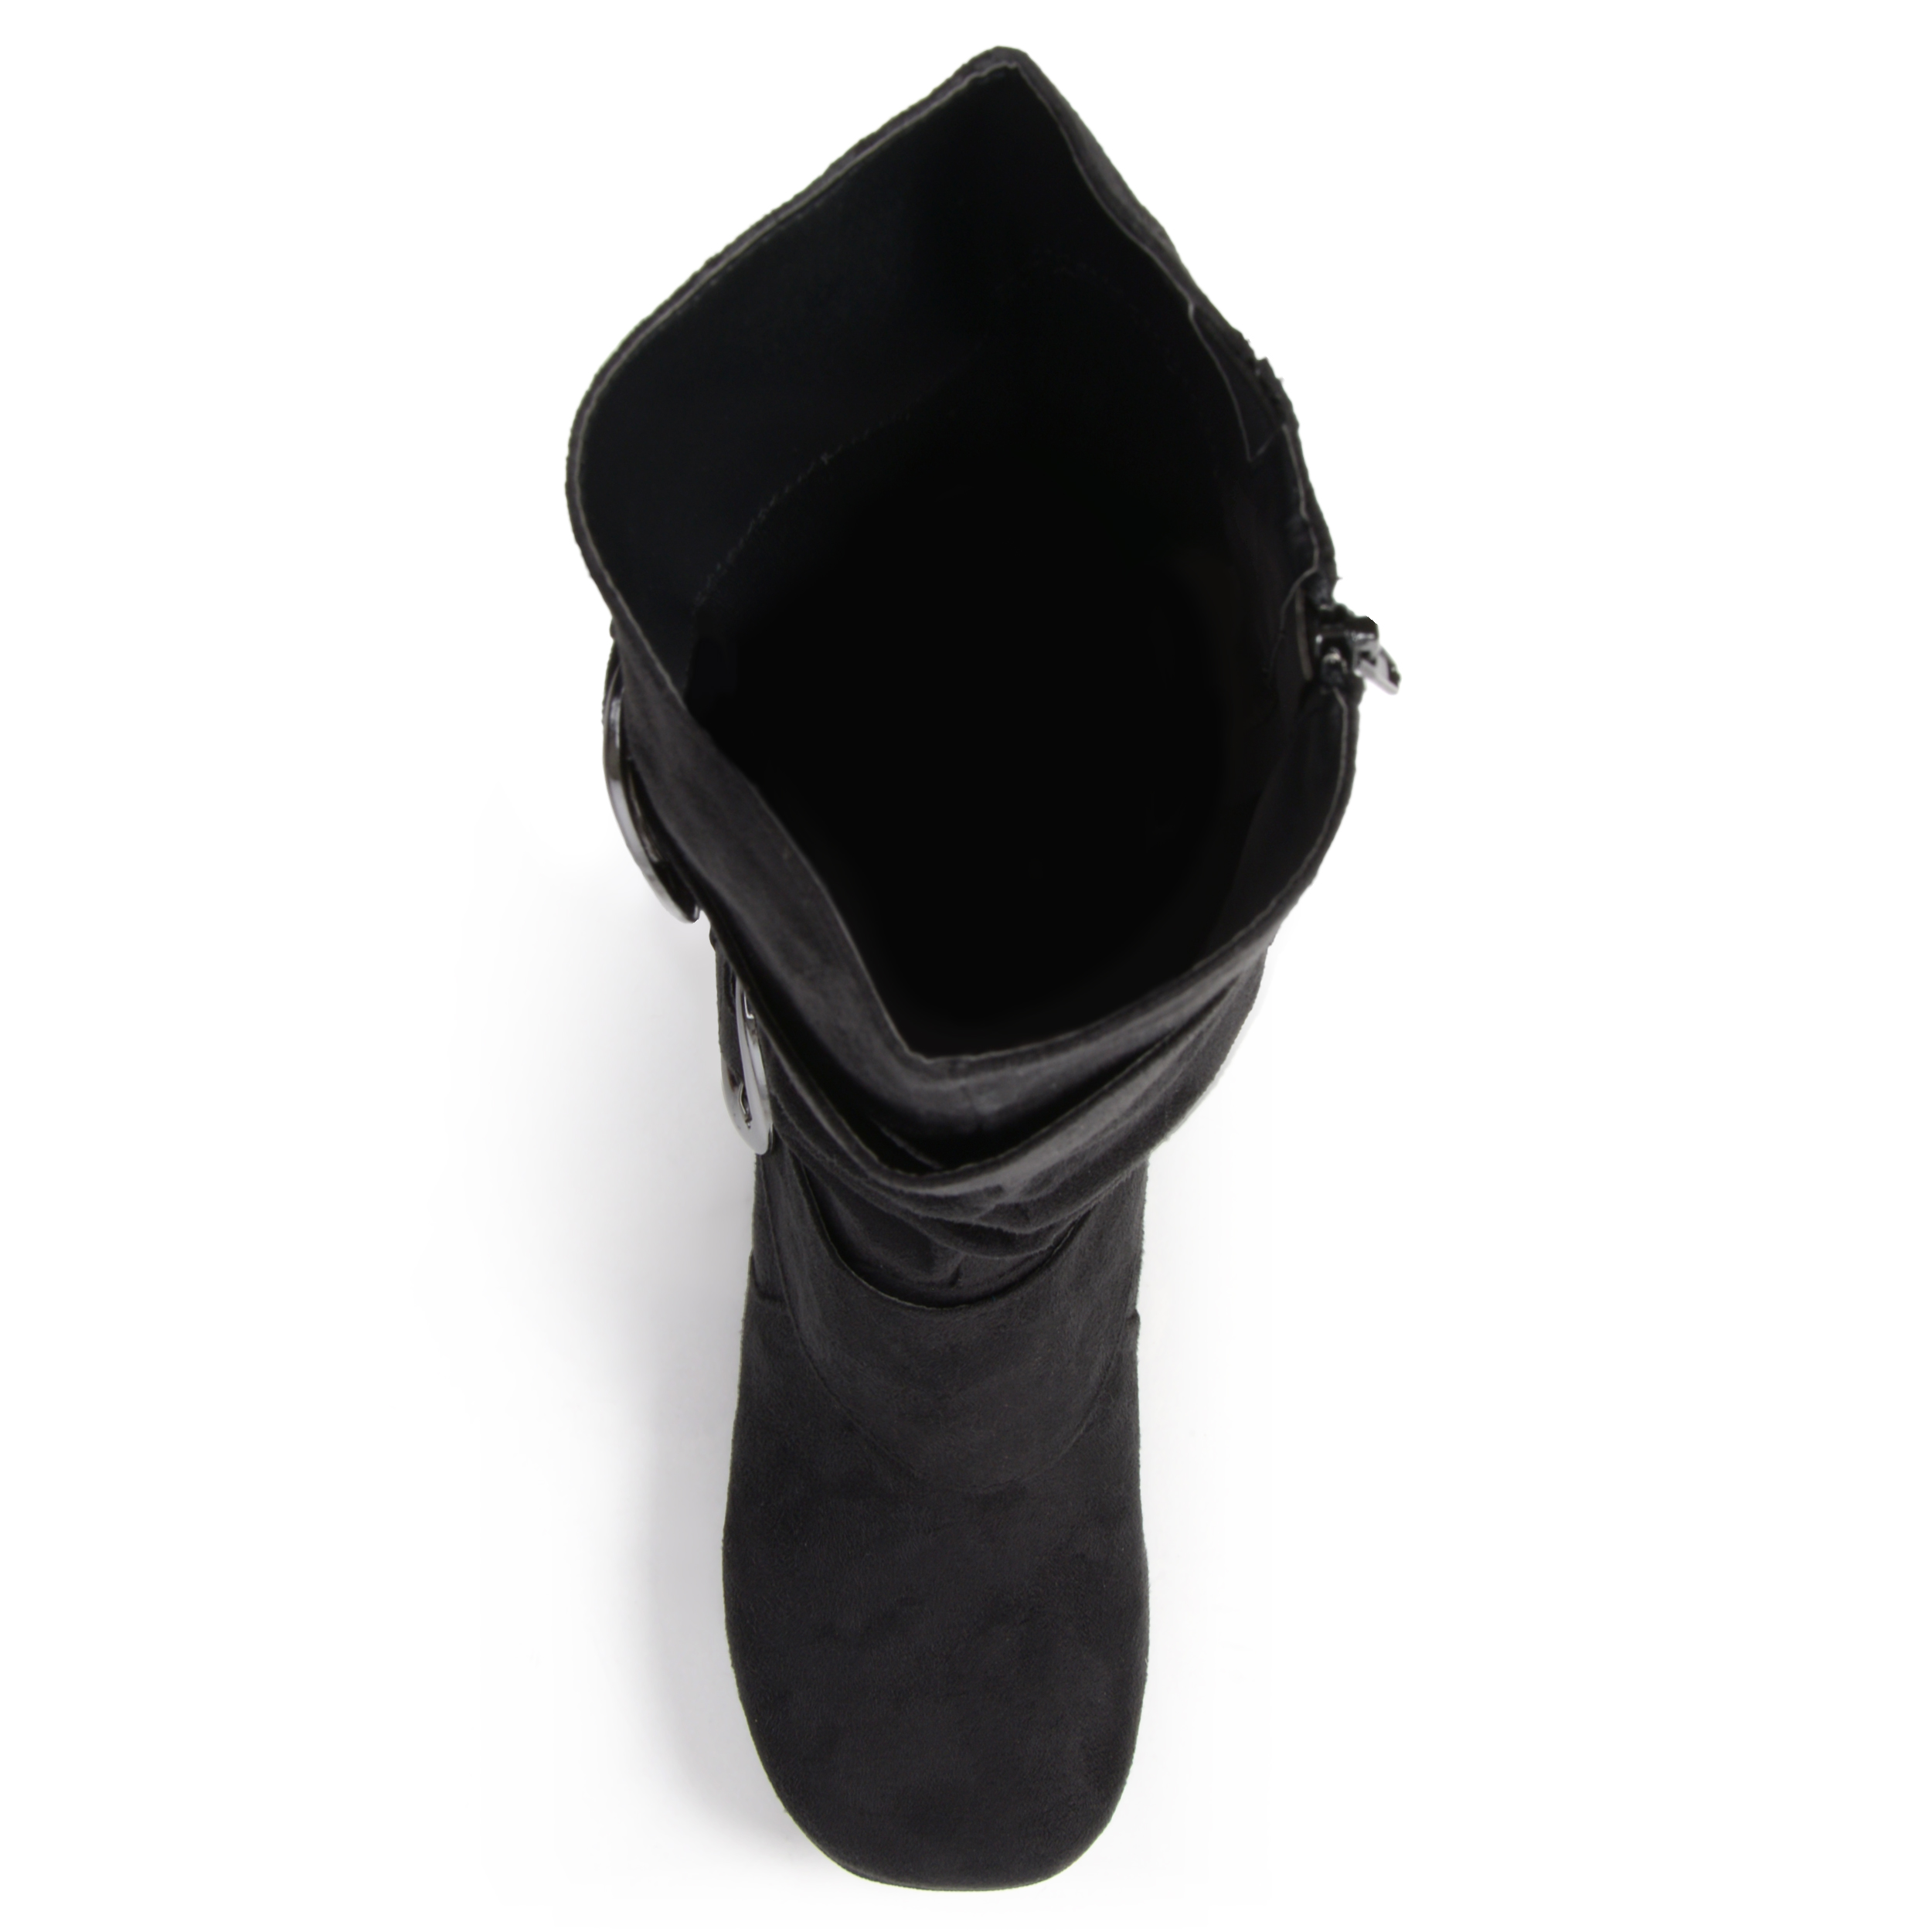 Brinley Co. Women's Extra Wide Calf Mid-Calf Slouch Riding Boots - image 5 of 8